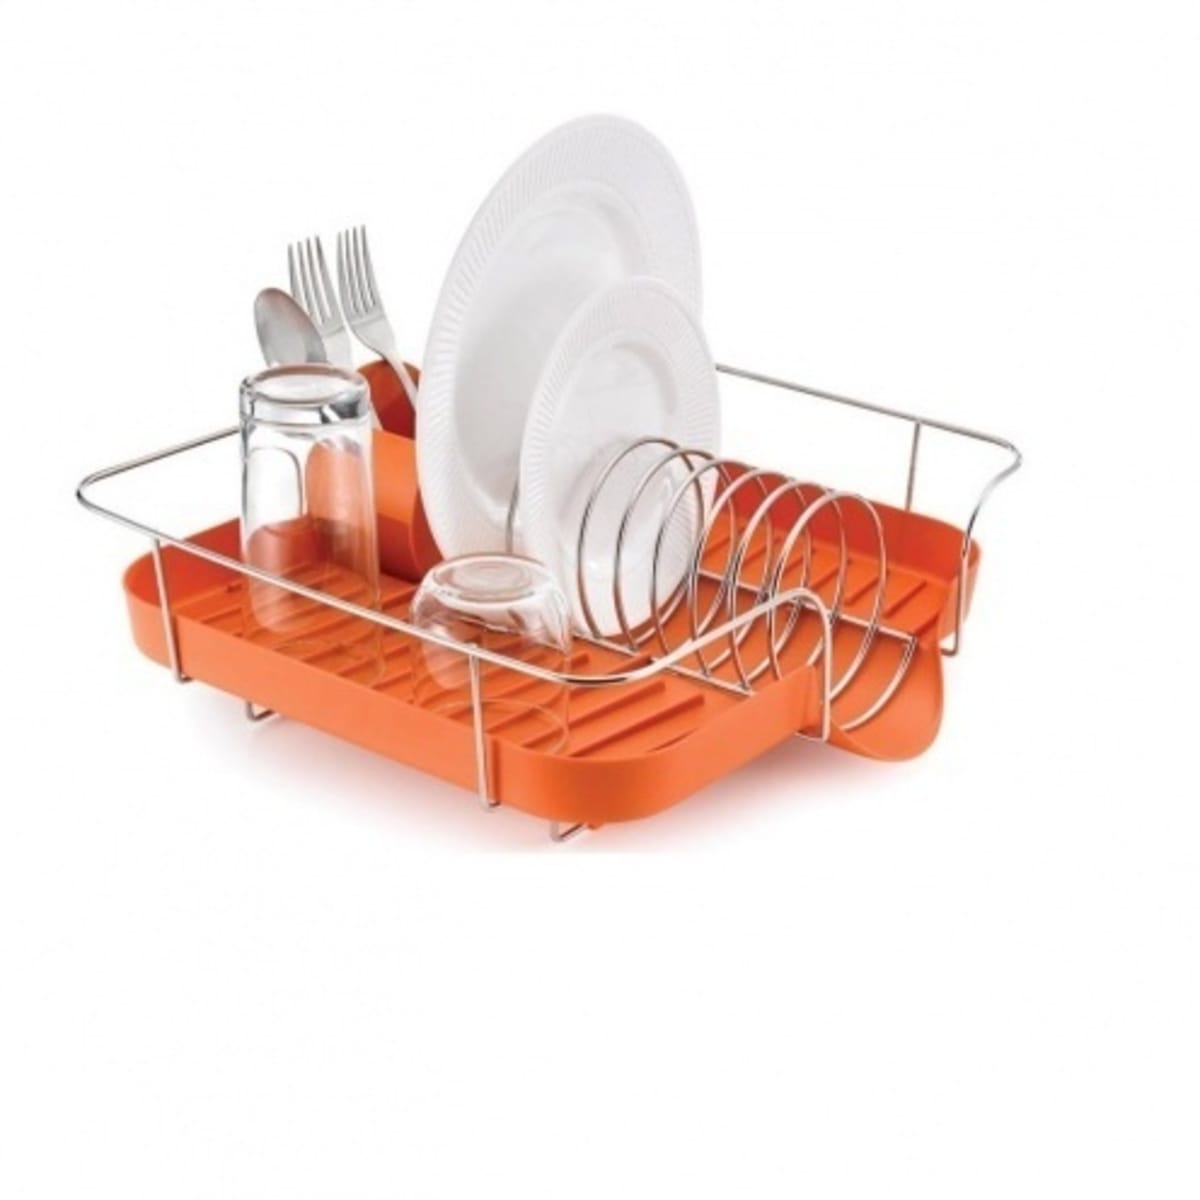 Spring Dish Rack  Polder Products UK - life.style.solutions